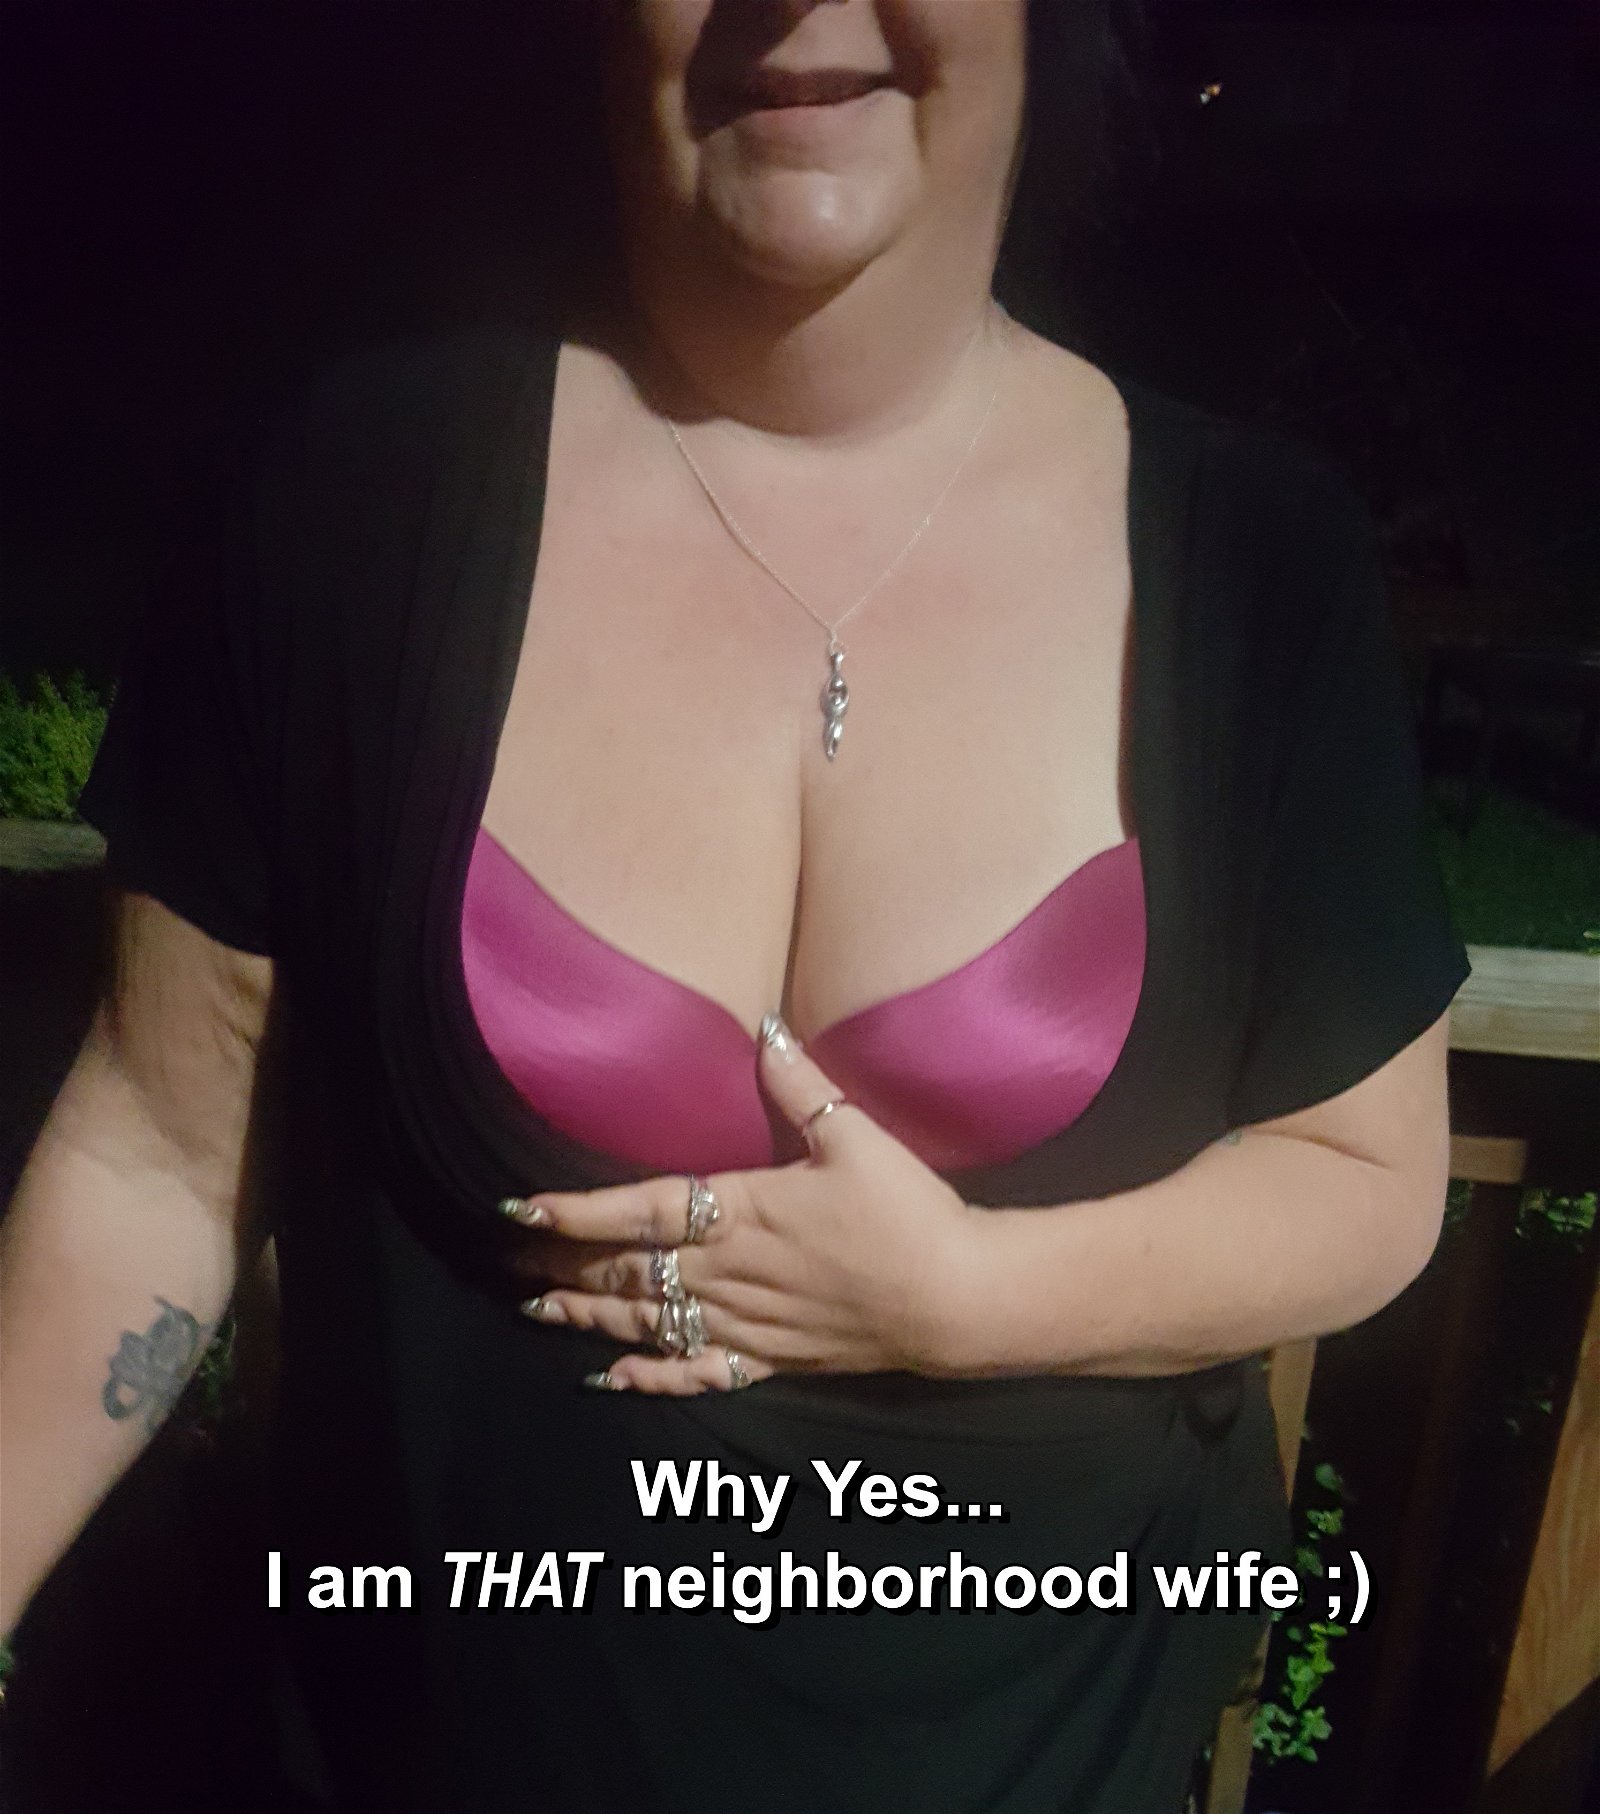 Photo by Dawn42D with the username @Dawn42D,  December 4, 2017 at 6:14 PM and the text says 'Every neighborhood has at least one like me ;) #tits  #big  #tits  #neighbor  #neighbor  #fantasy  #neighborhood  #milf  #milf  #cougar  #slut  #wife  #hotwife  #slutwife  #sexy  #cleavage  #bbw  #curvy  #curvalicious  #vixen  #look  #at  #my  #tits..'